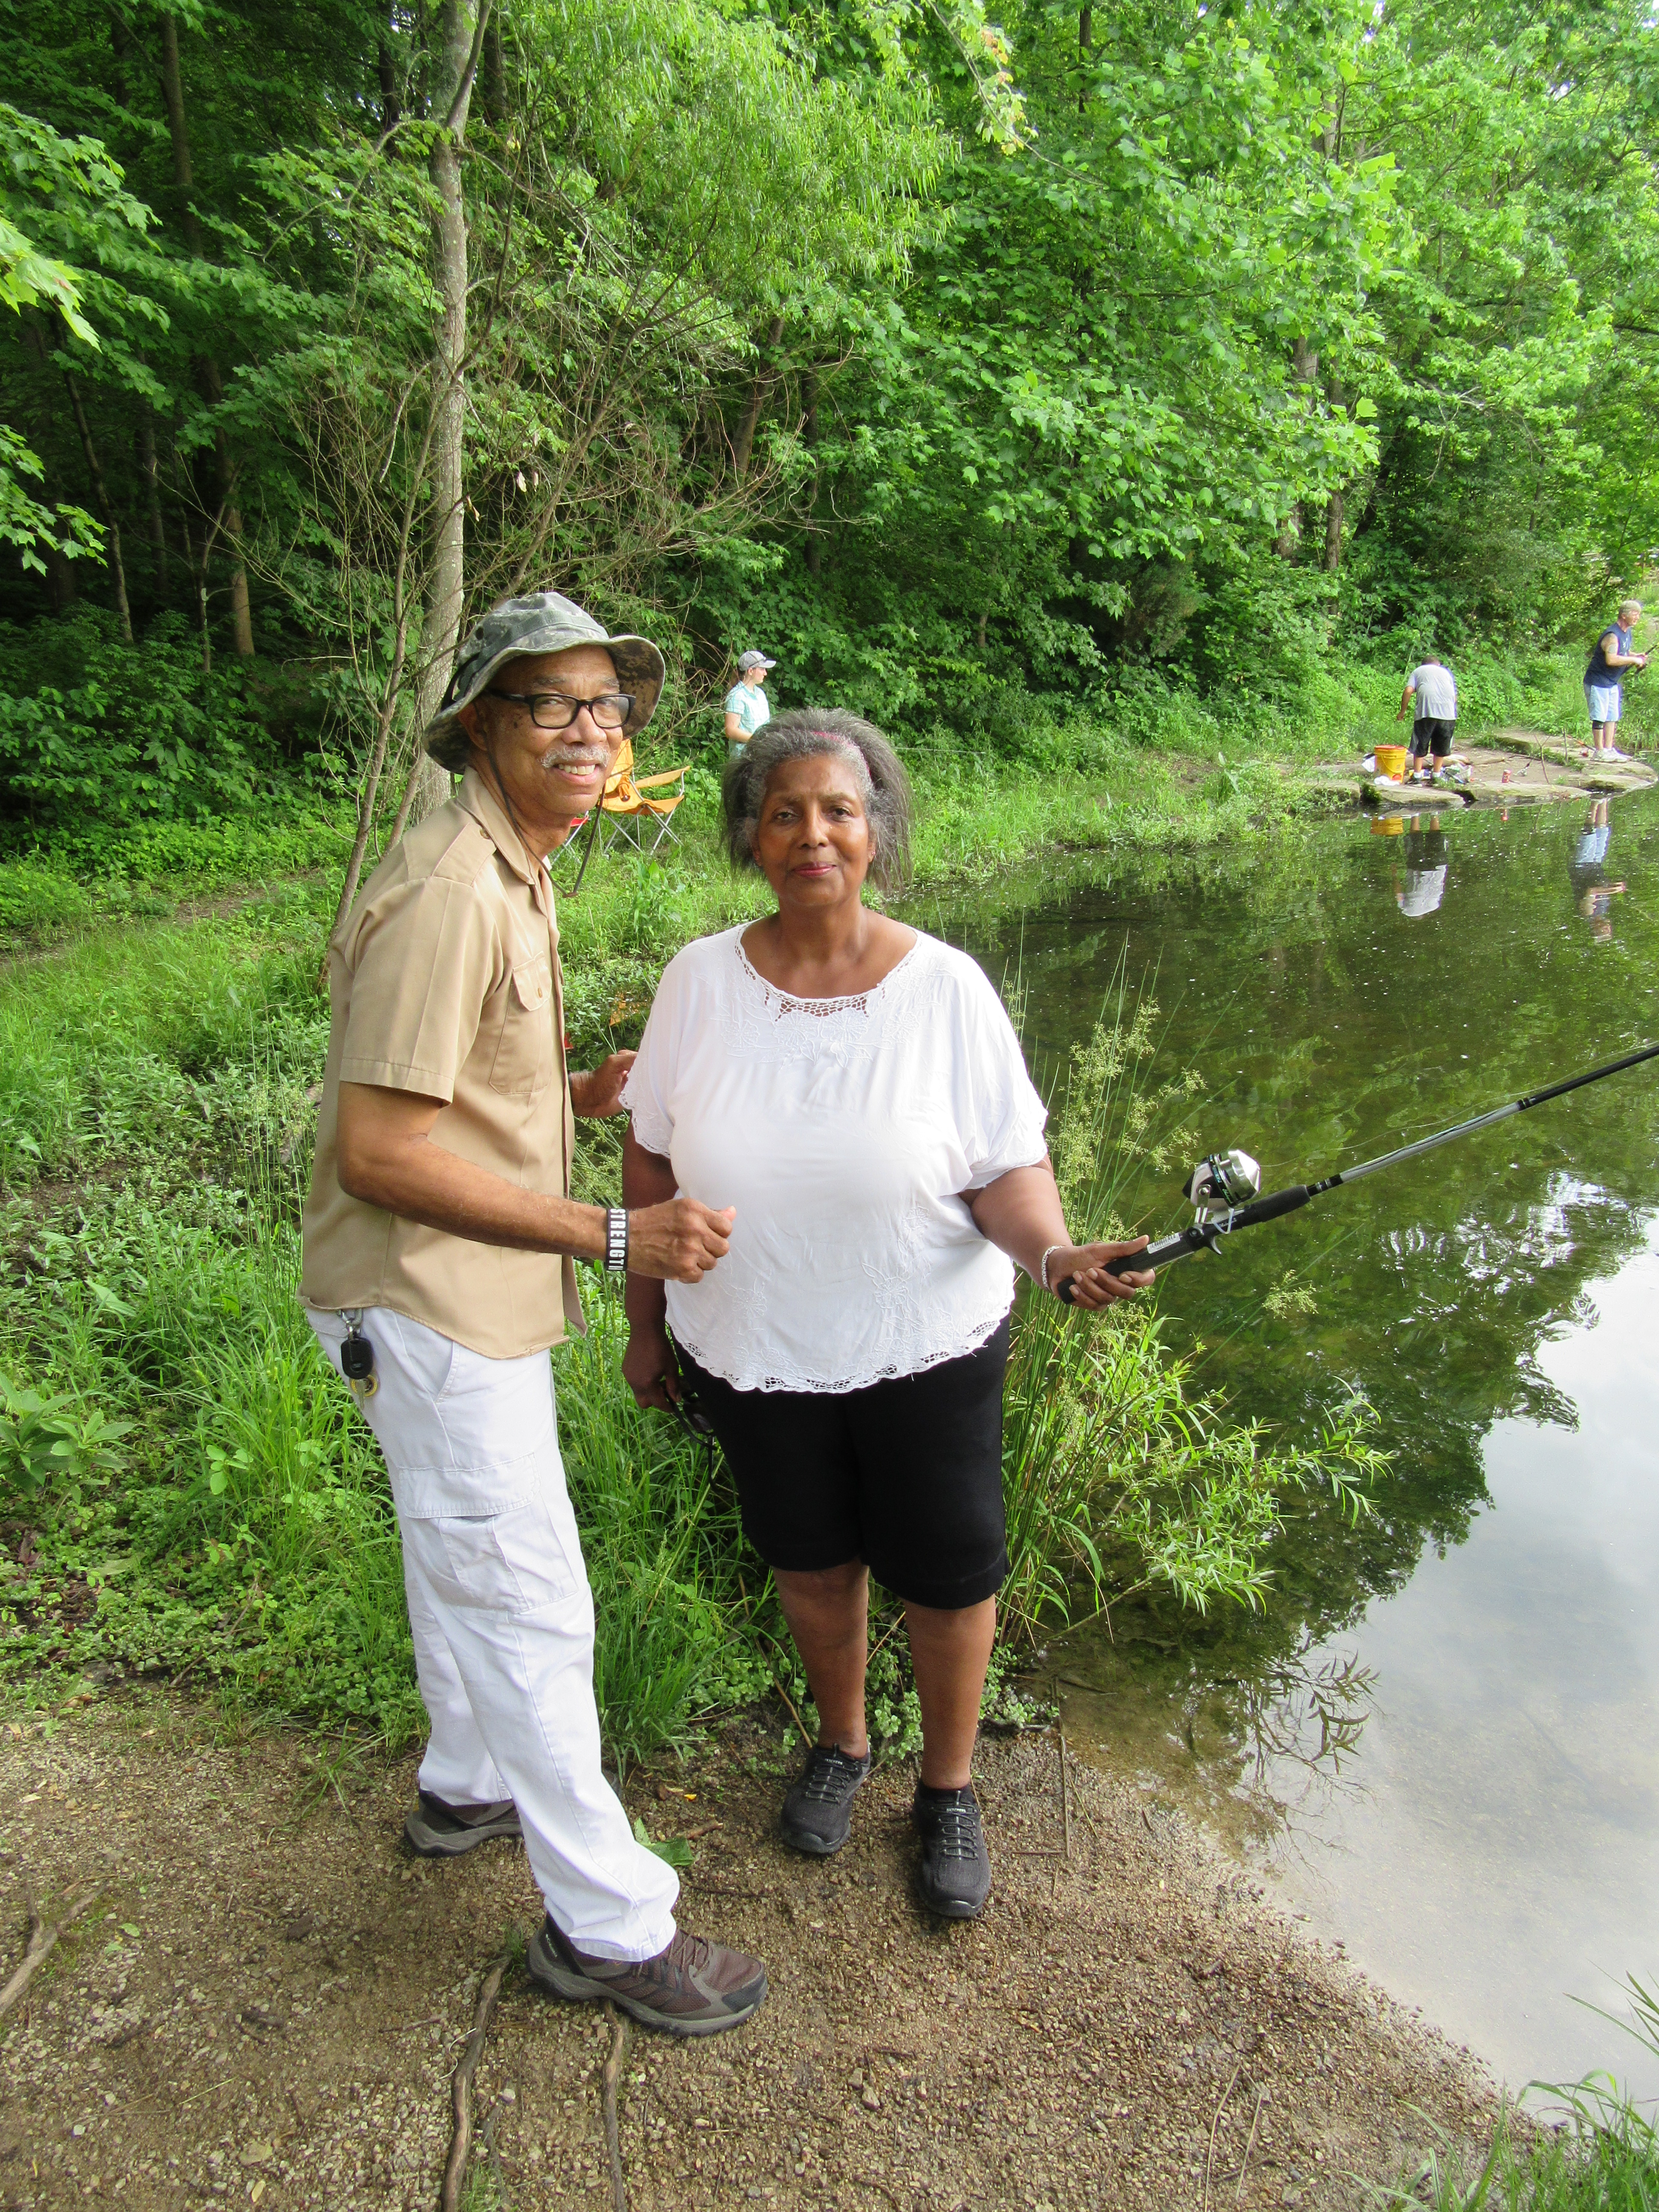 A couple is smiling for the camera as a woman is holding out a Fishing Pole into a pond